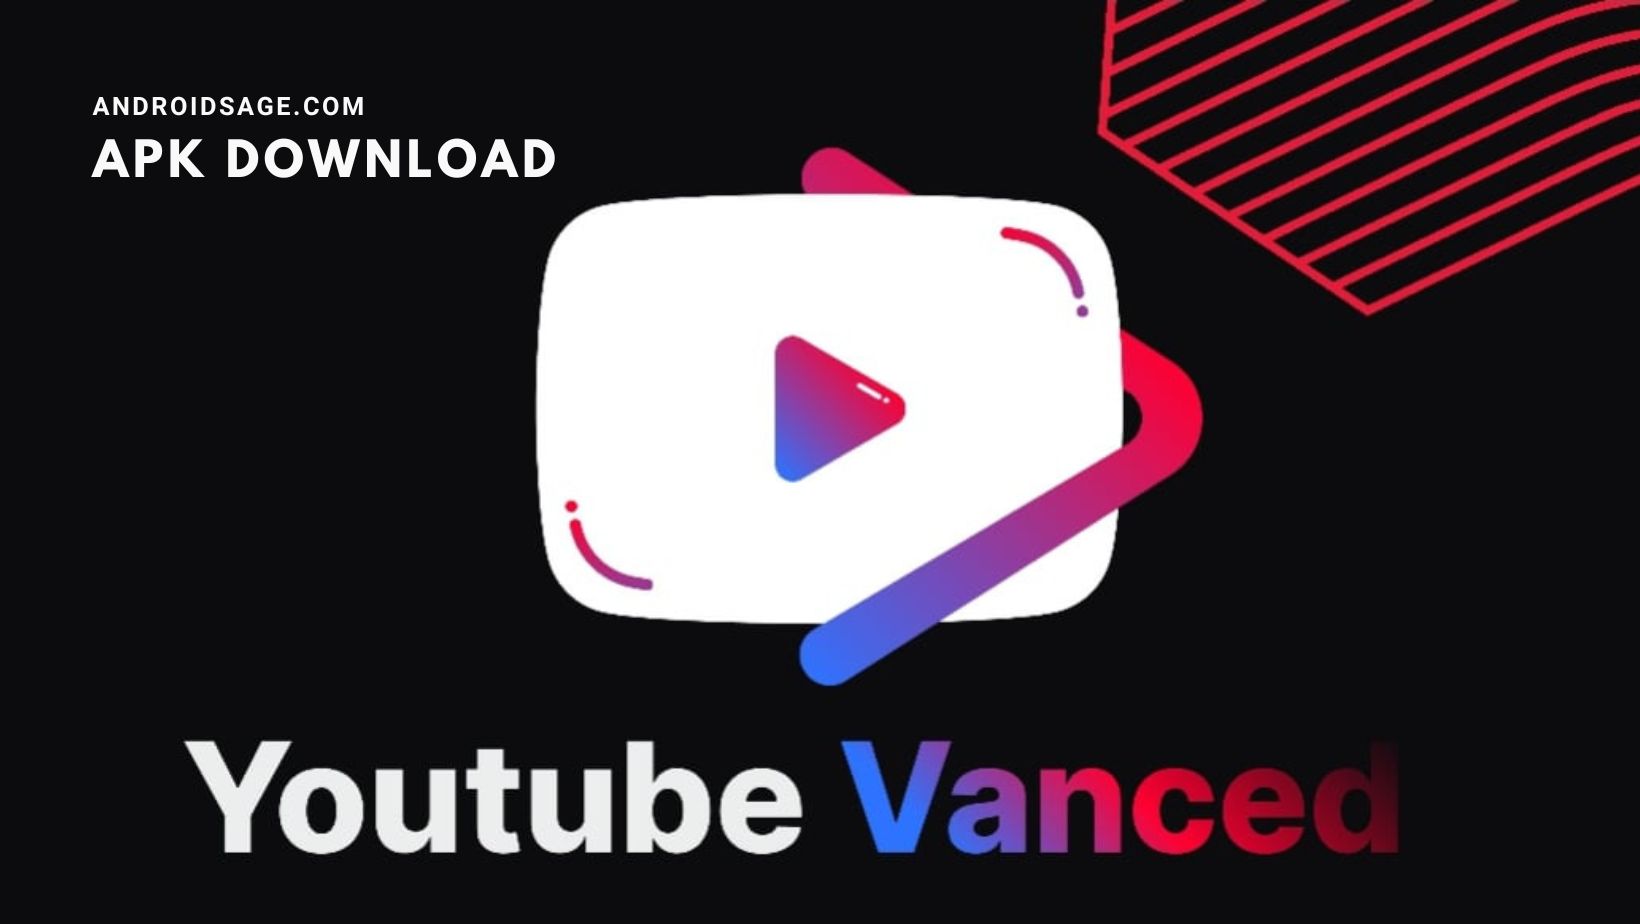 Latest YouTube Vanced APK Download v18.17.43 and YT Music 6.01.55